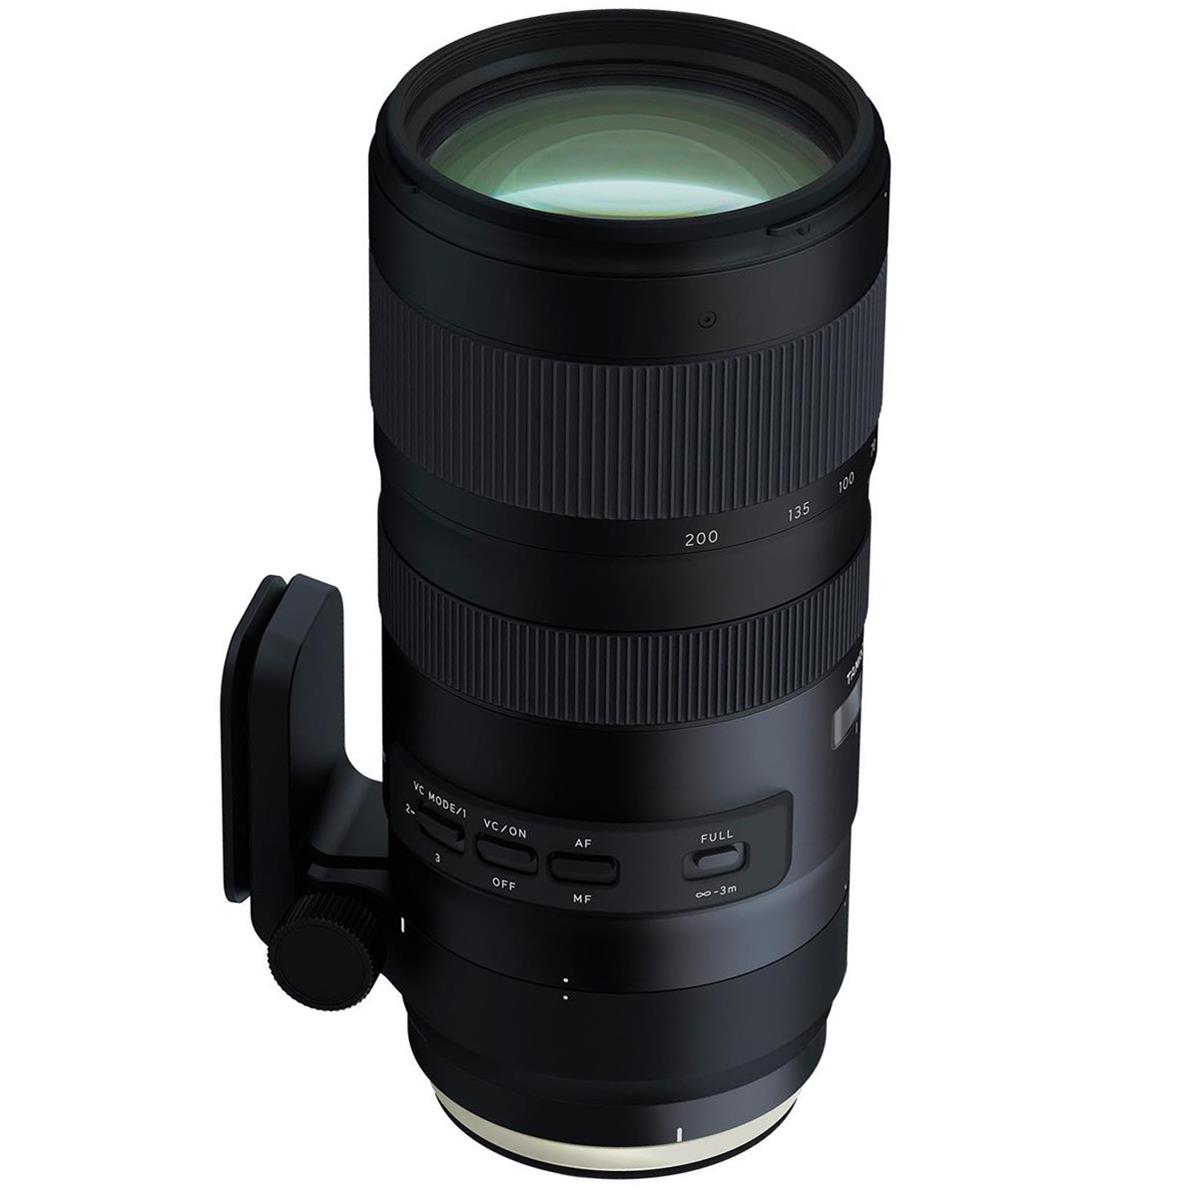 Tamron SP 70-200mm f/2.8 Di VC USD G2 Lens for Canon EF -  AFA025C-700